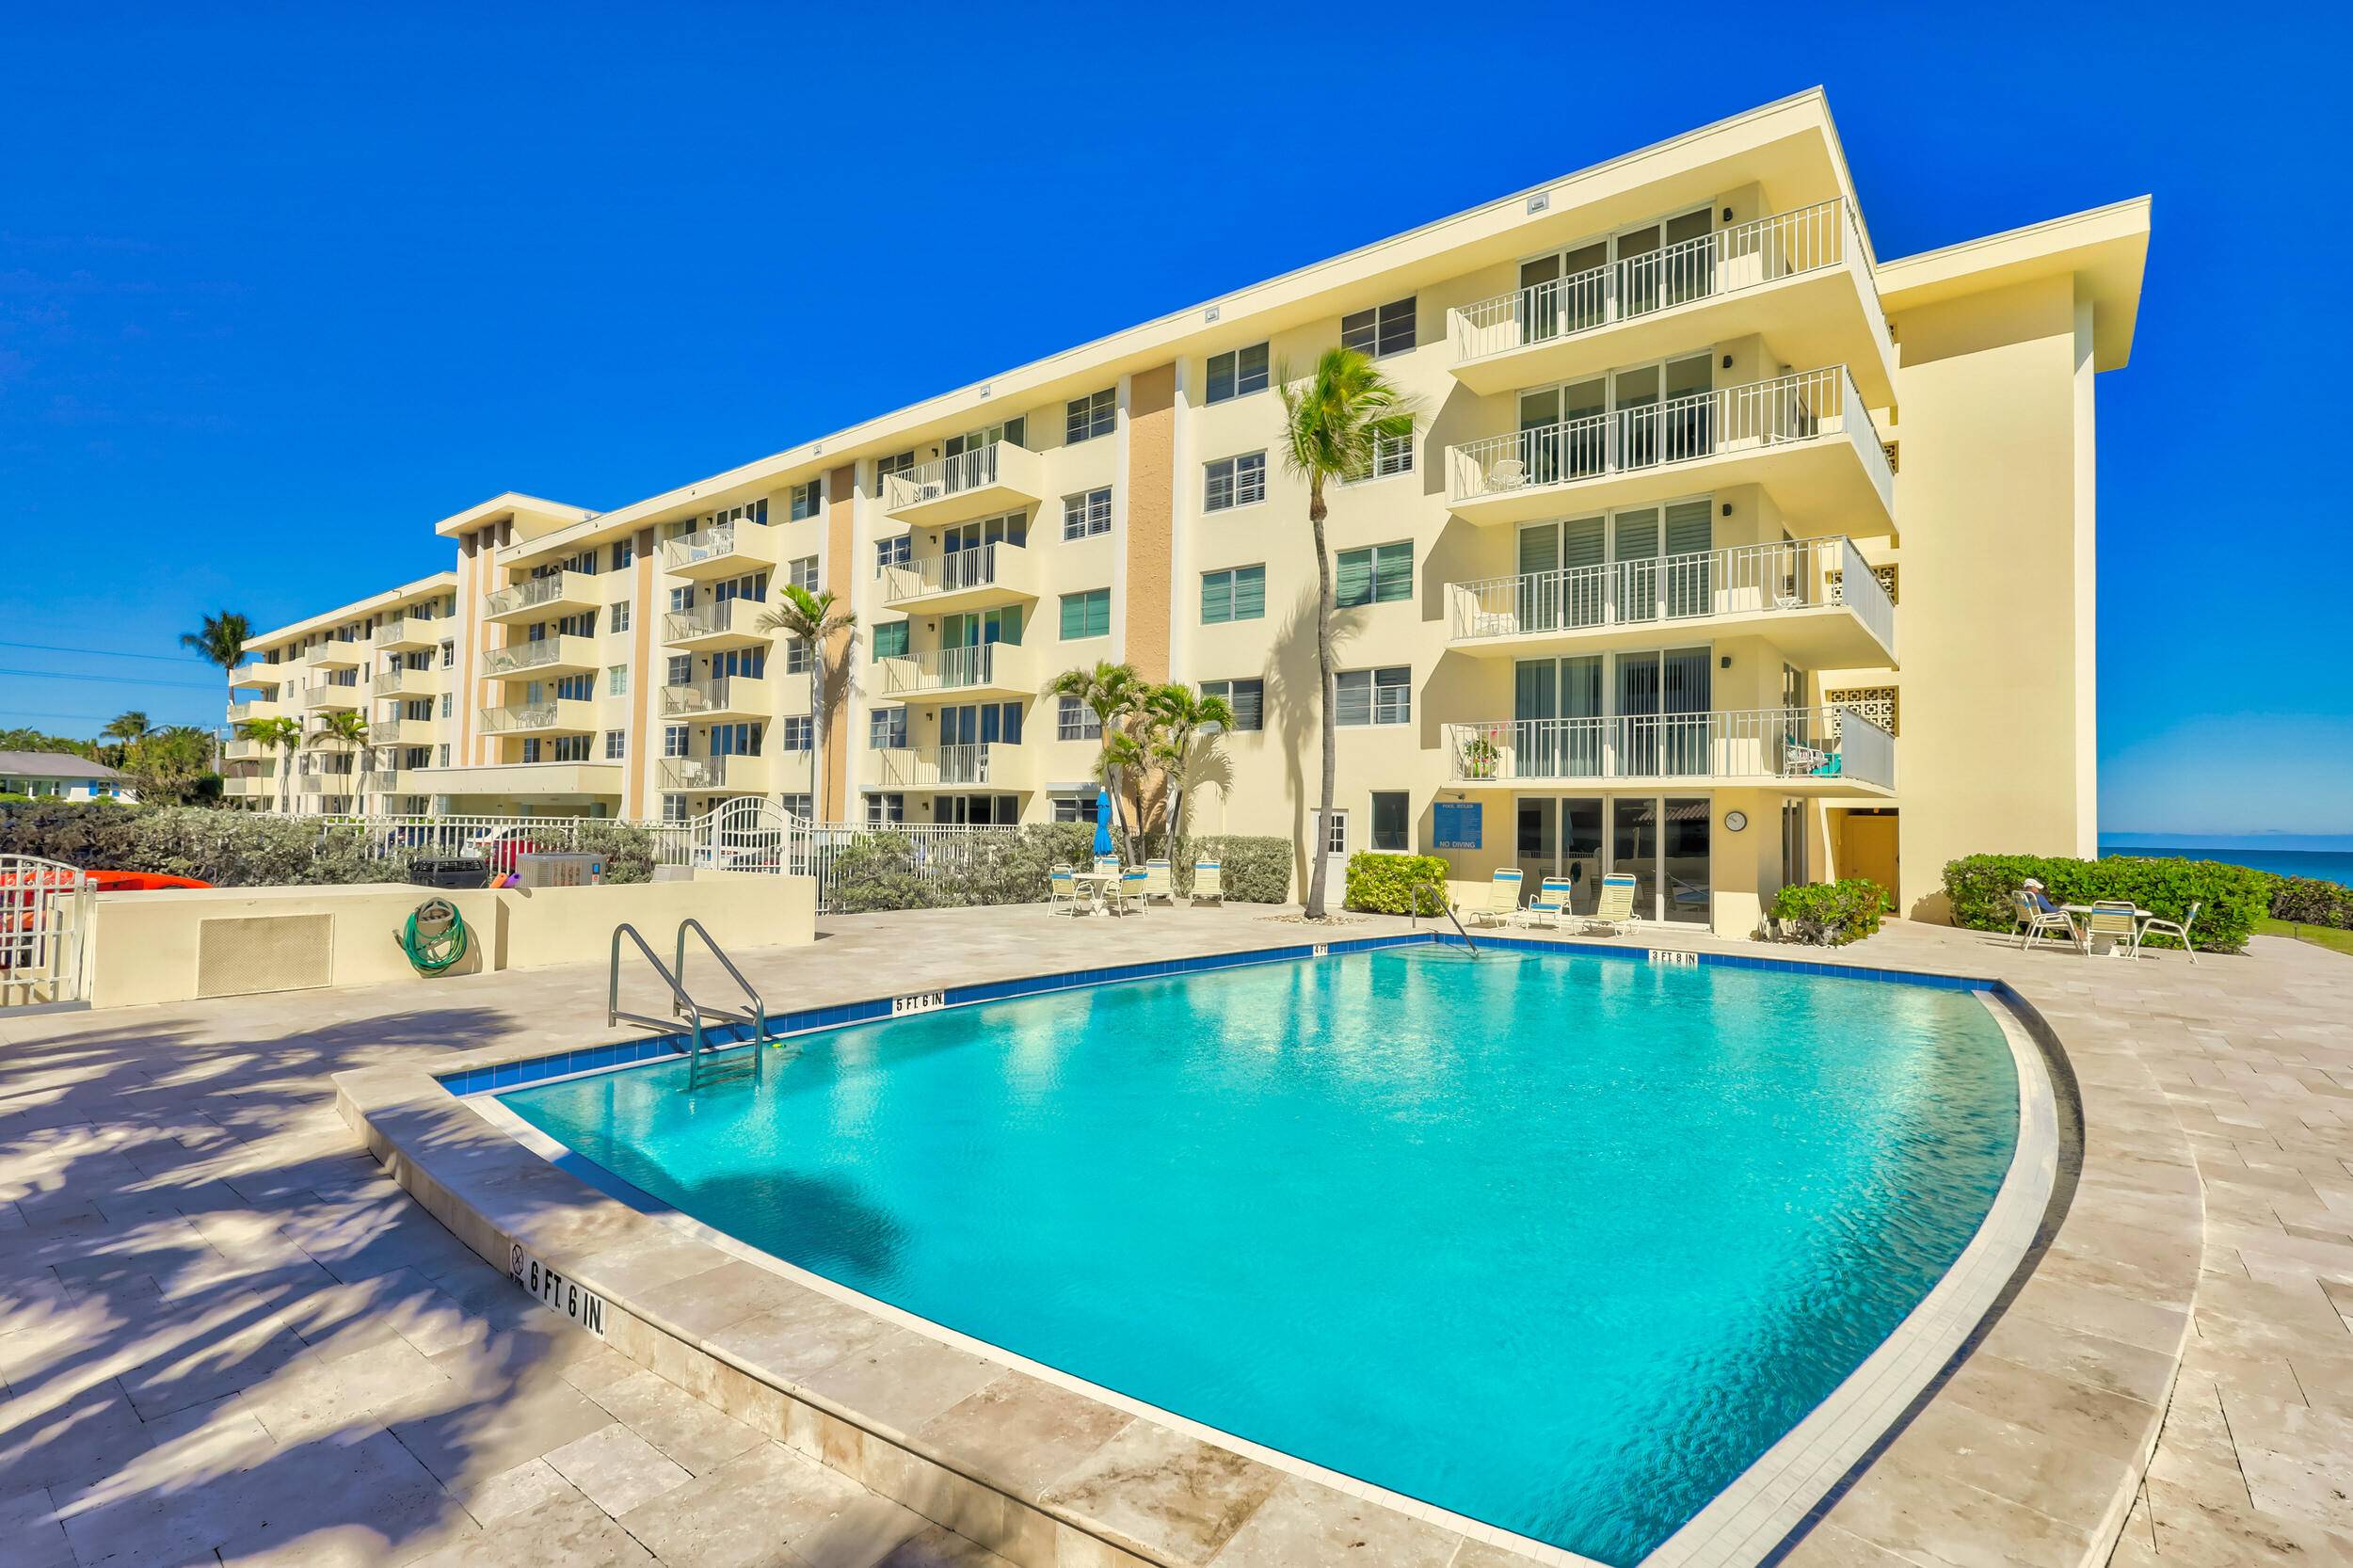 This ground floor condo on the ocean is calling your name !